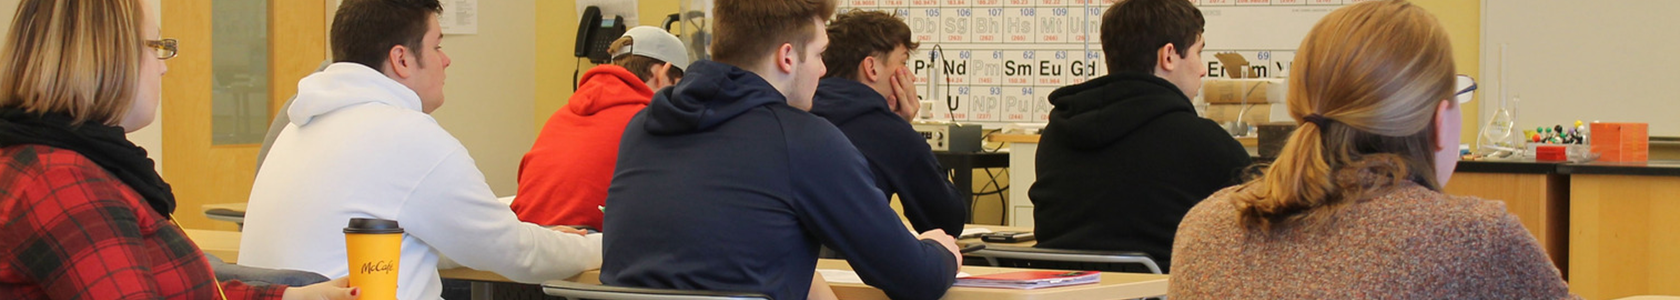 students in a chemistry classroom looking at the whiteboard